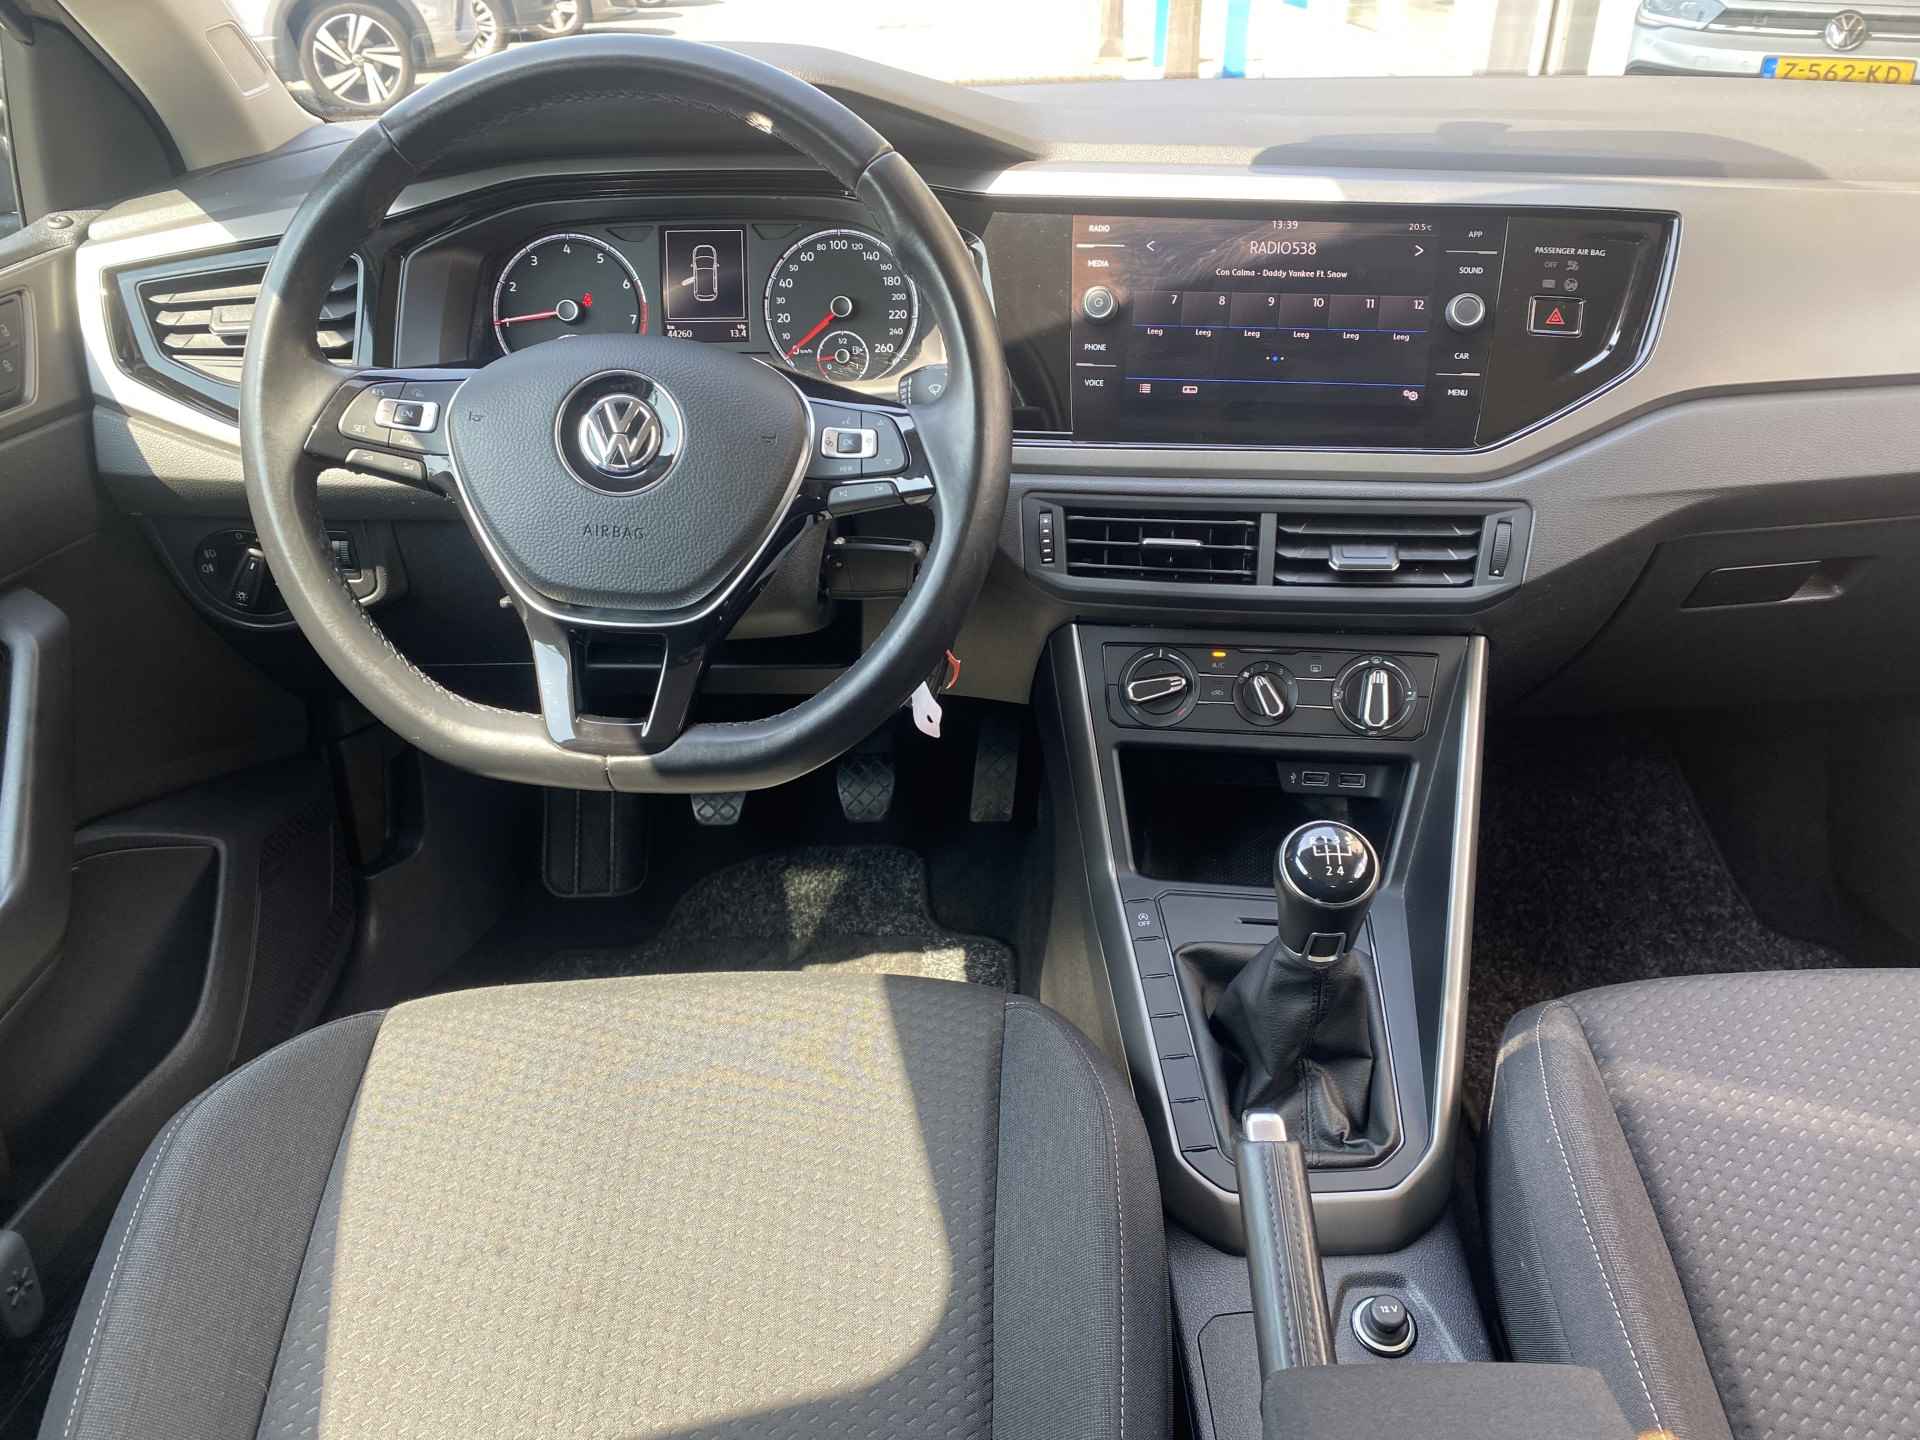 Volkswagen Polo 1.0 MPI Comfortline / APP-CONNECT/ AIRCO/ TREKHAAK/ BLUETOOTH/ CRUISE - 8/33